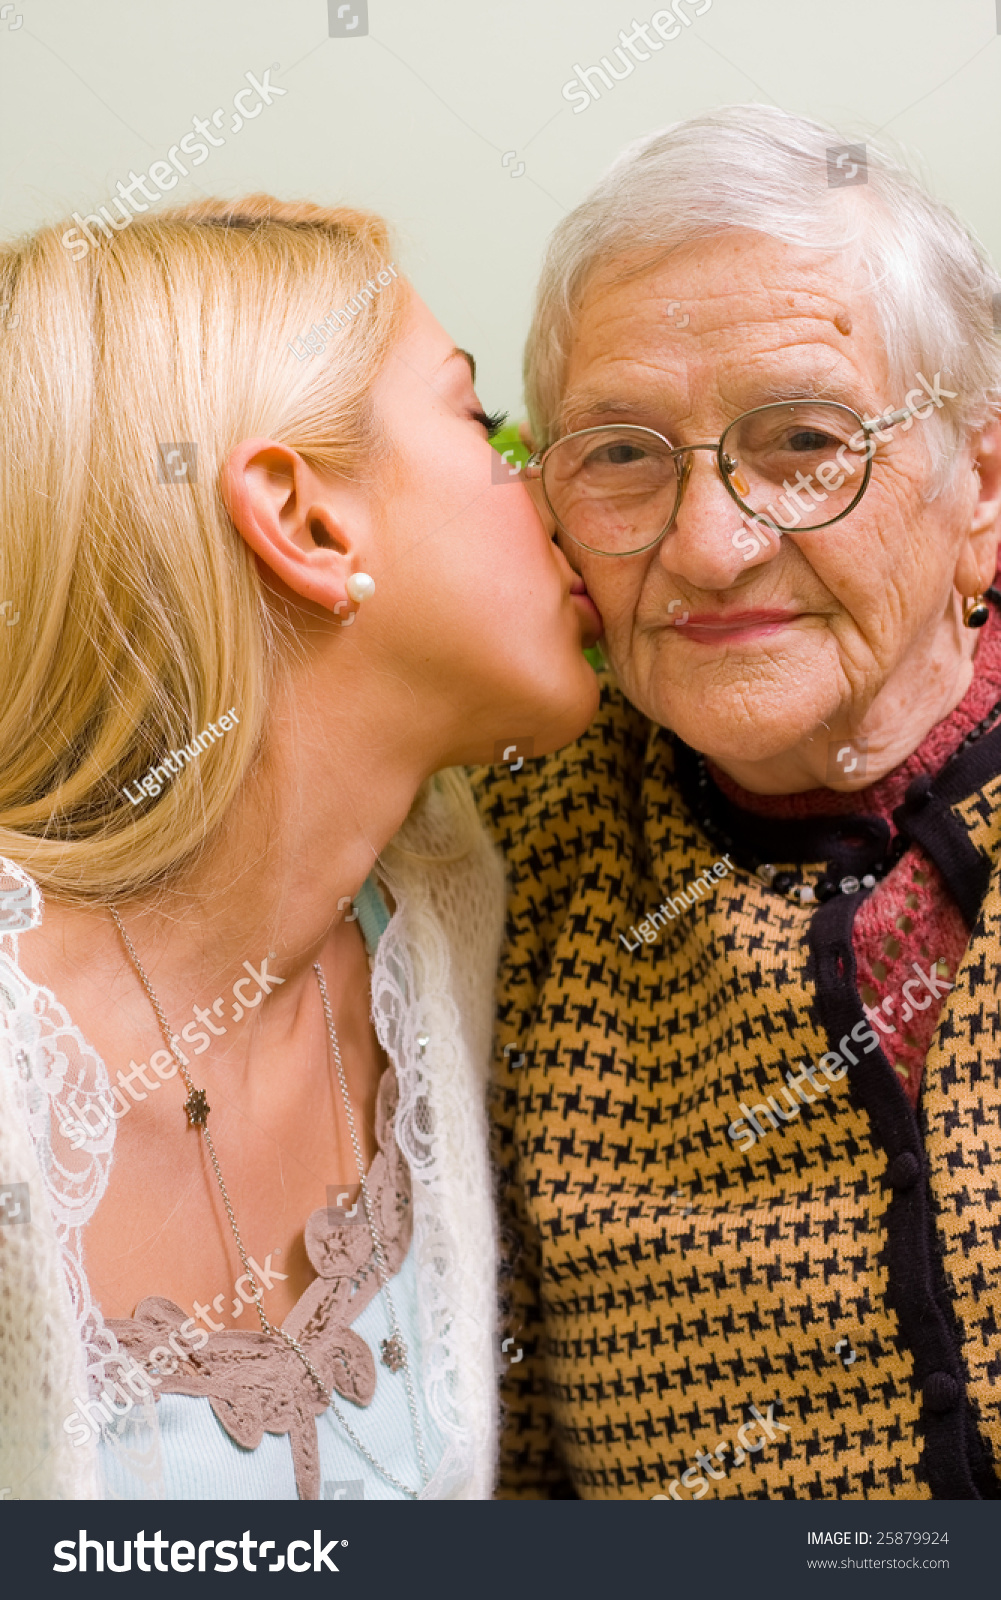 A Young Woman Kissing An Older One Focus On The Elderly Part Of A